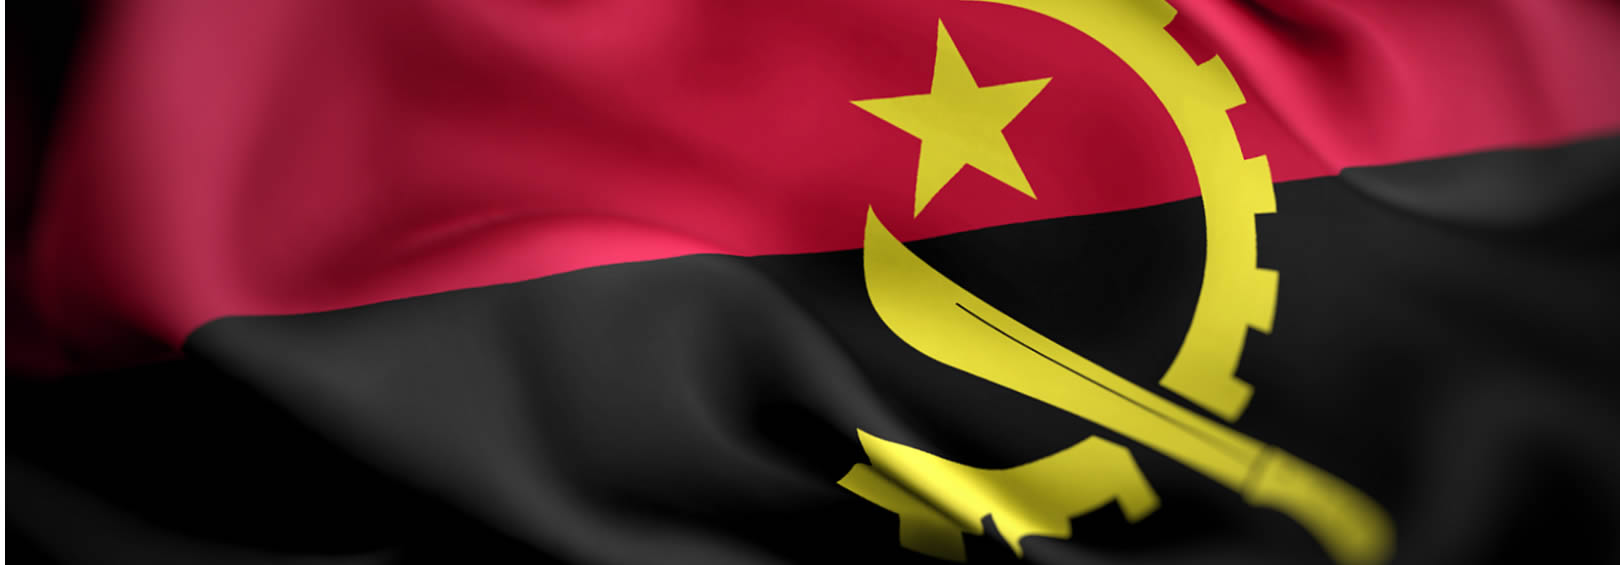 The Republic of Angola becomes the 21st Member State of ATI